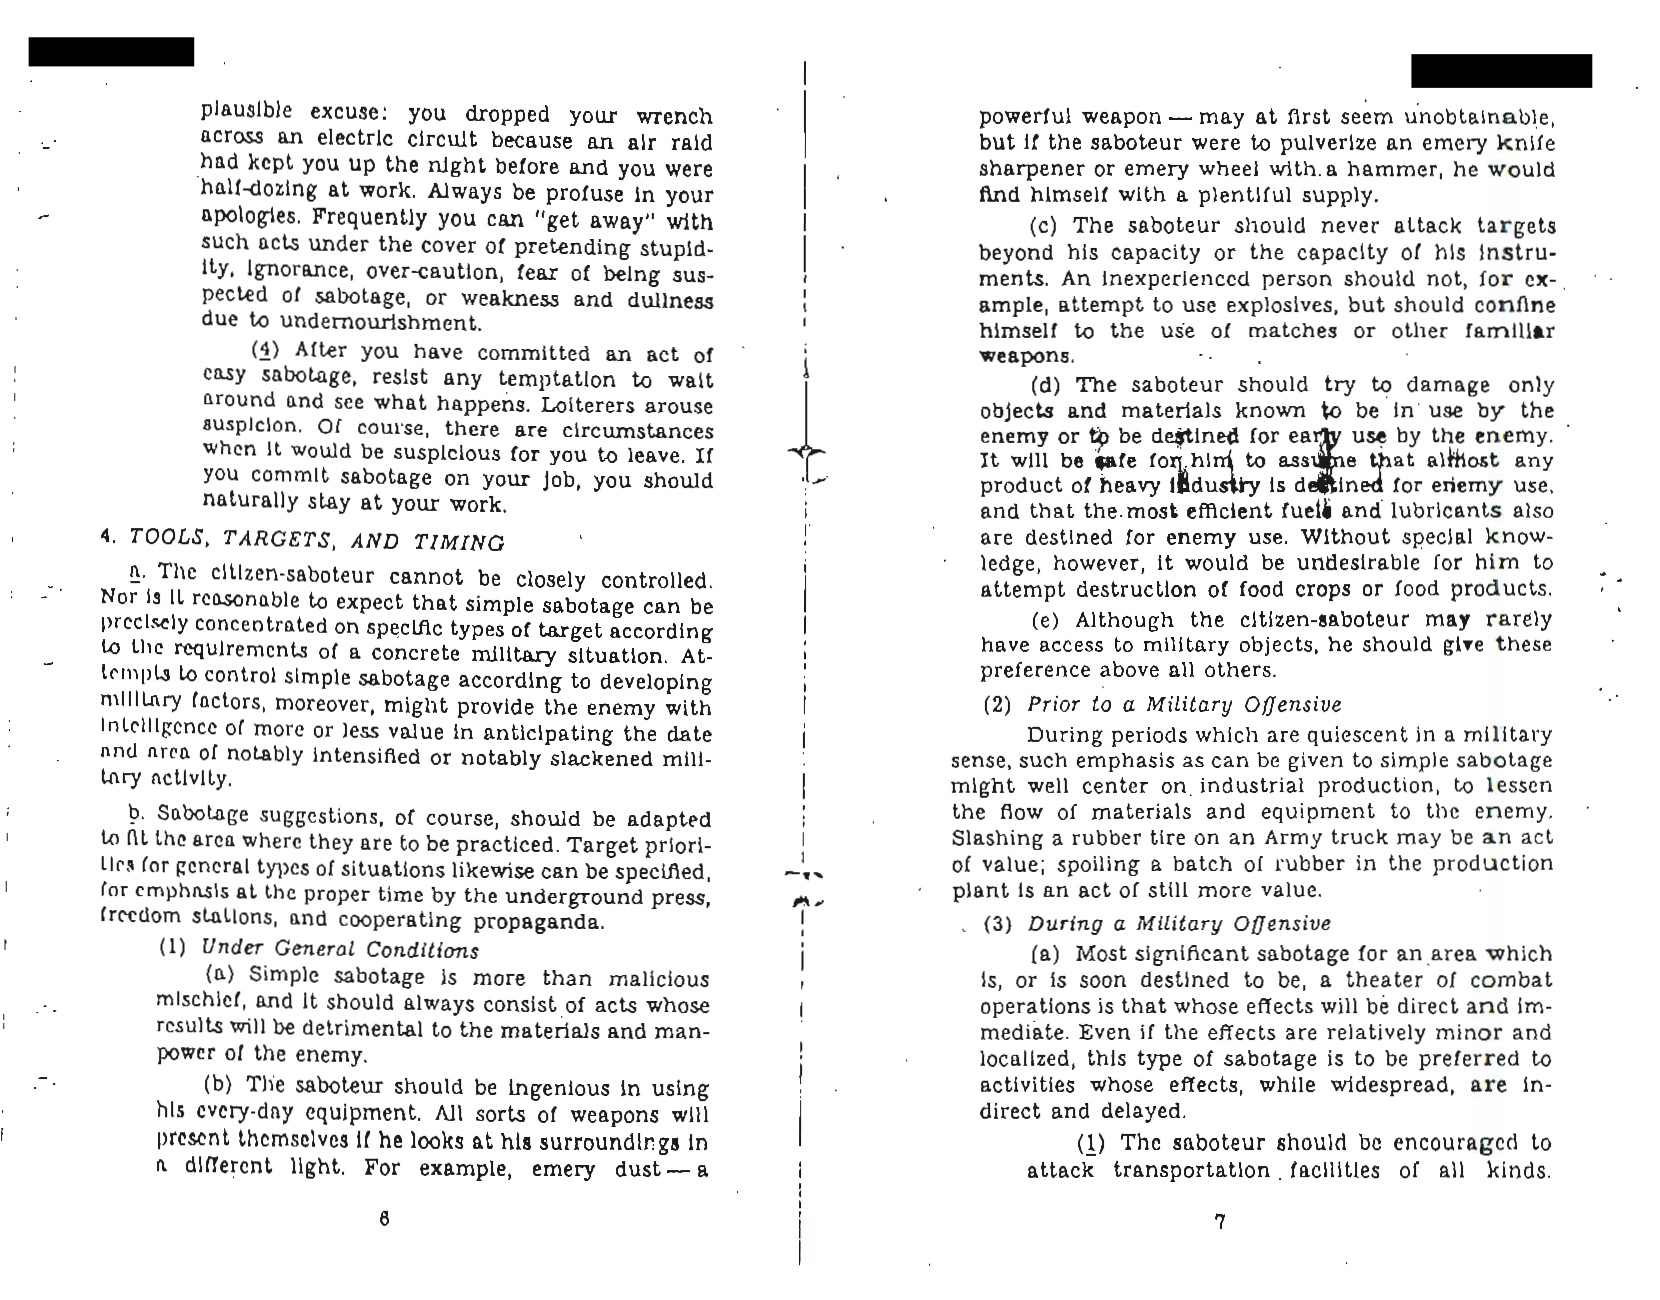 The CIA’s Simple Sabotage Field Manual: An Everyday Guide To